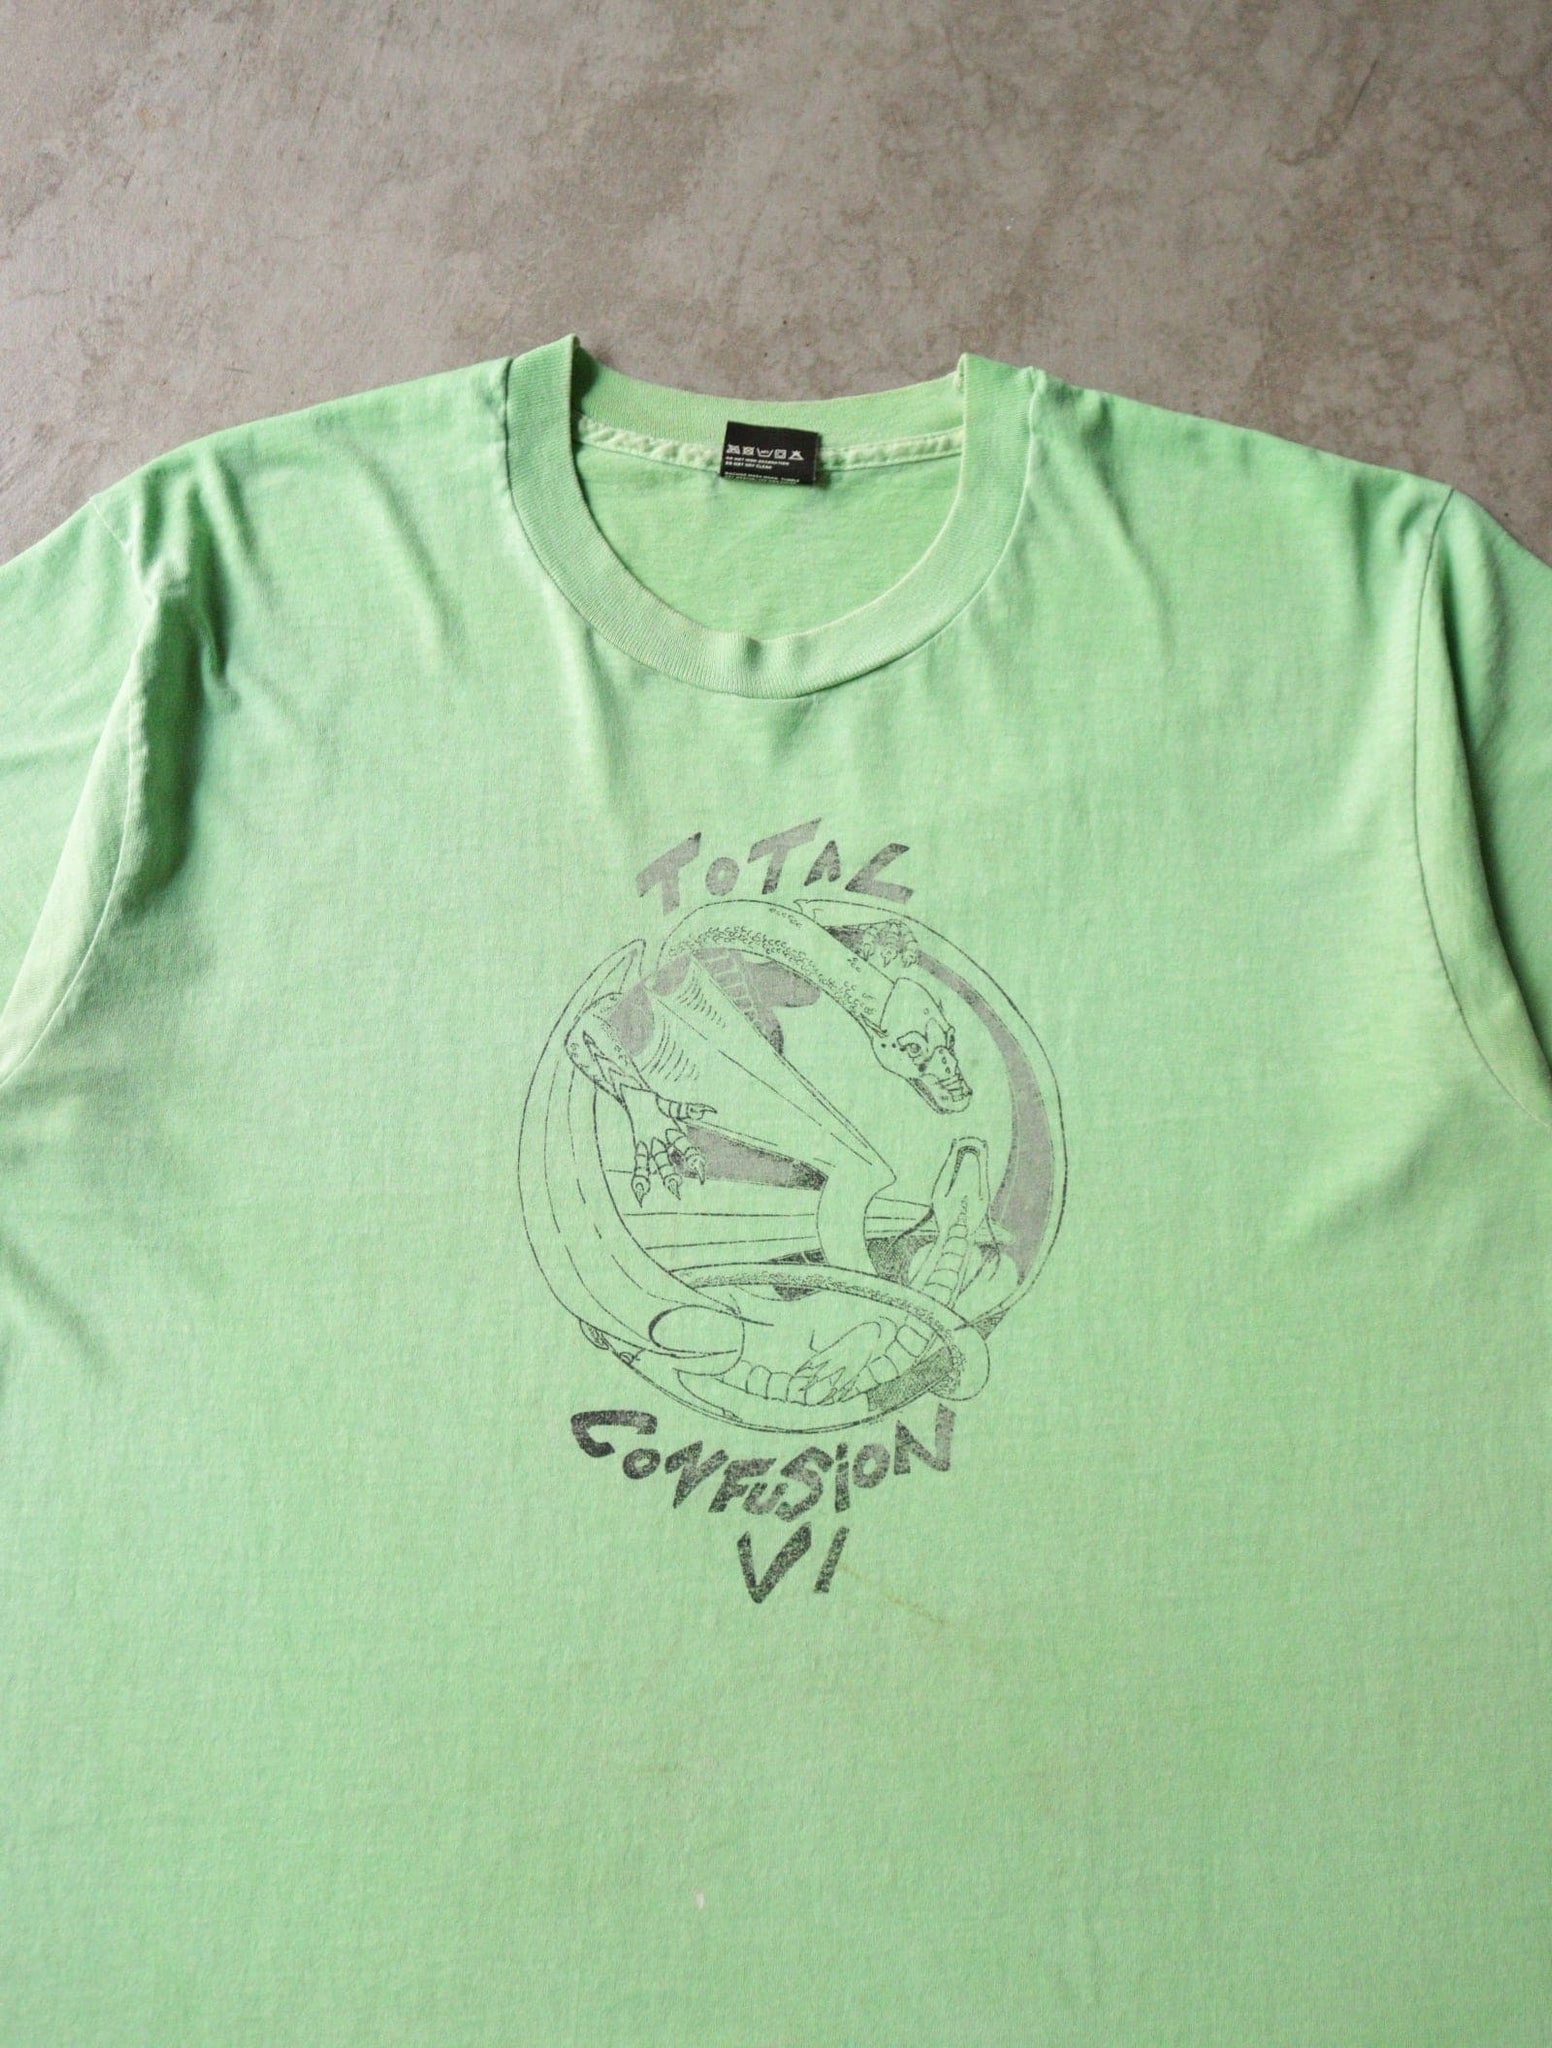 1980S TOTAL CONFUSION PUNK BAND TEE